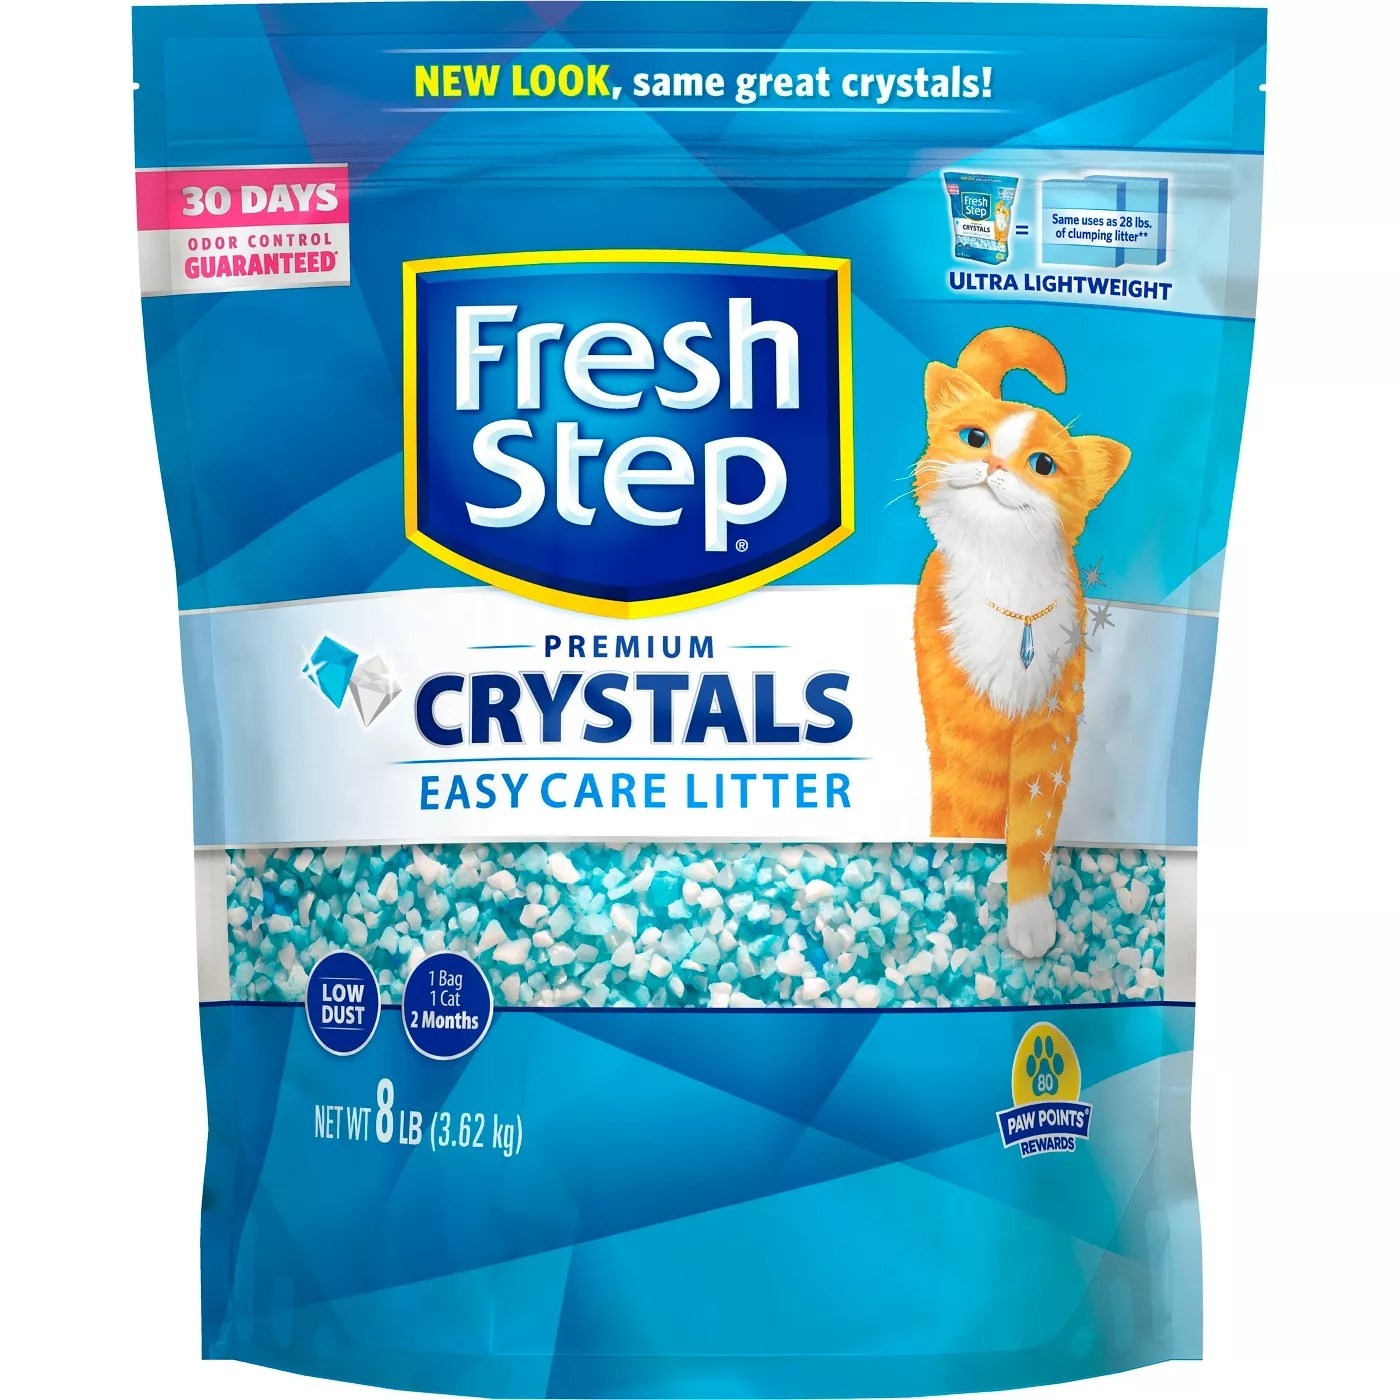 A bag of Fresh Step Premium Crystals Easy Care Litter